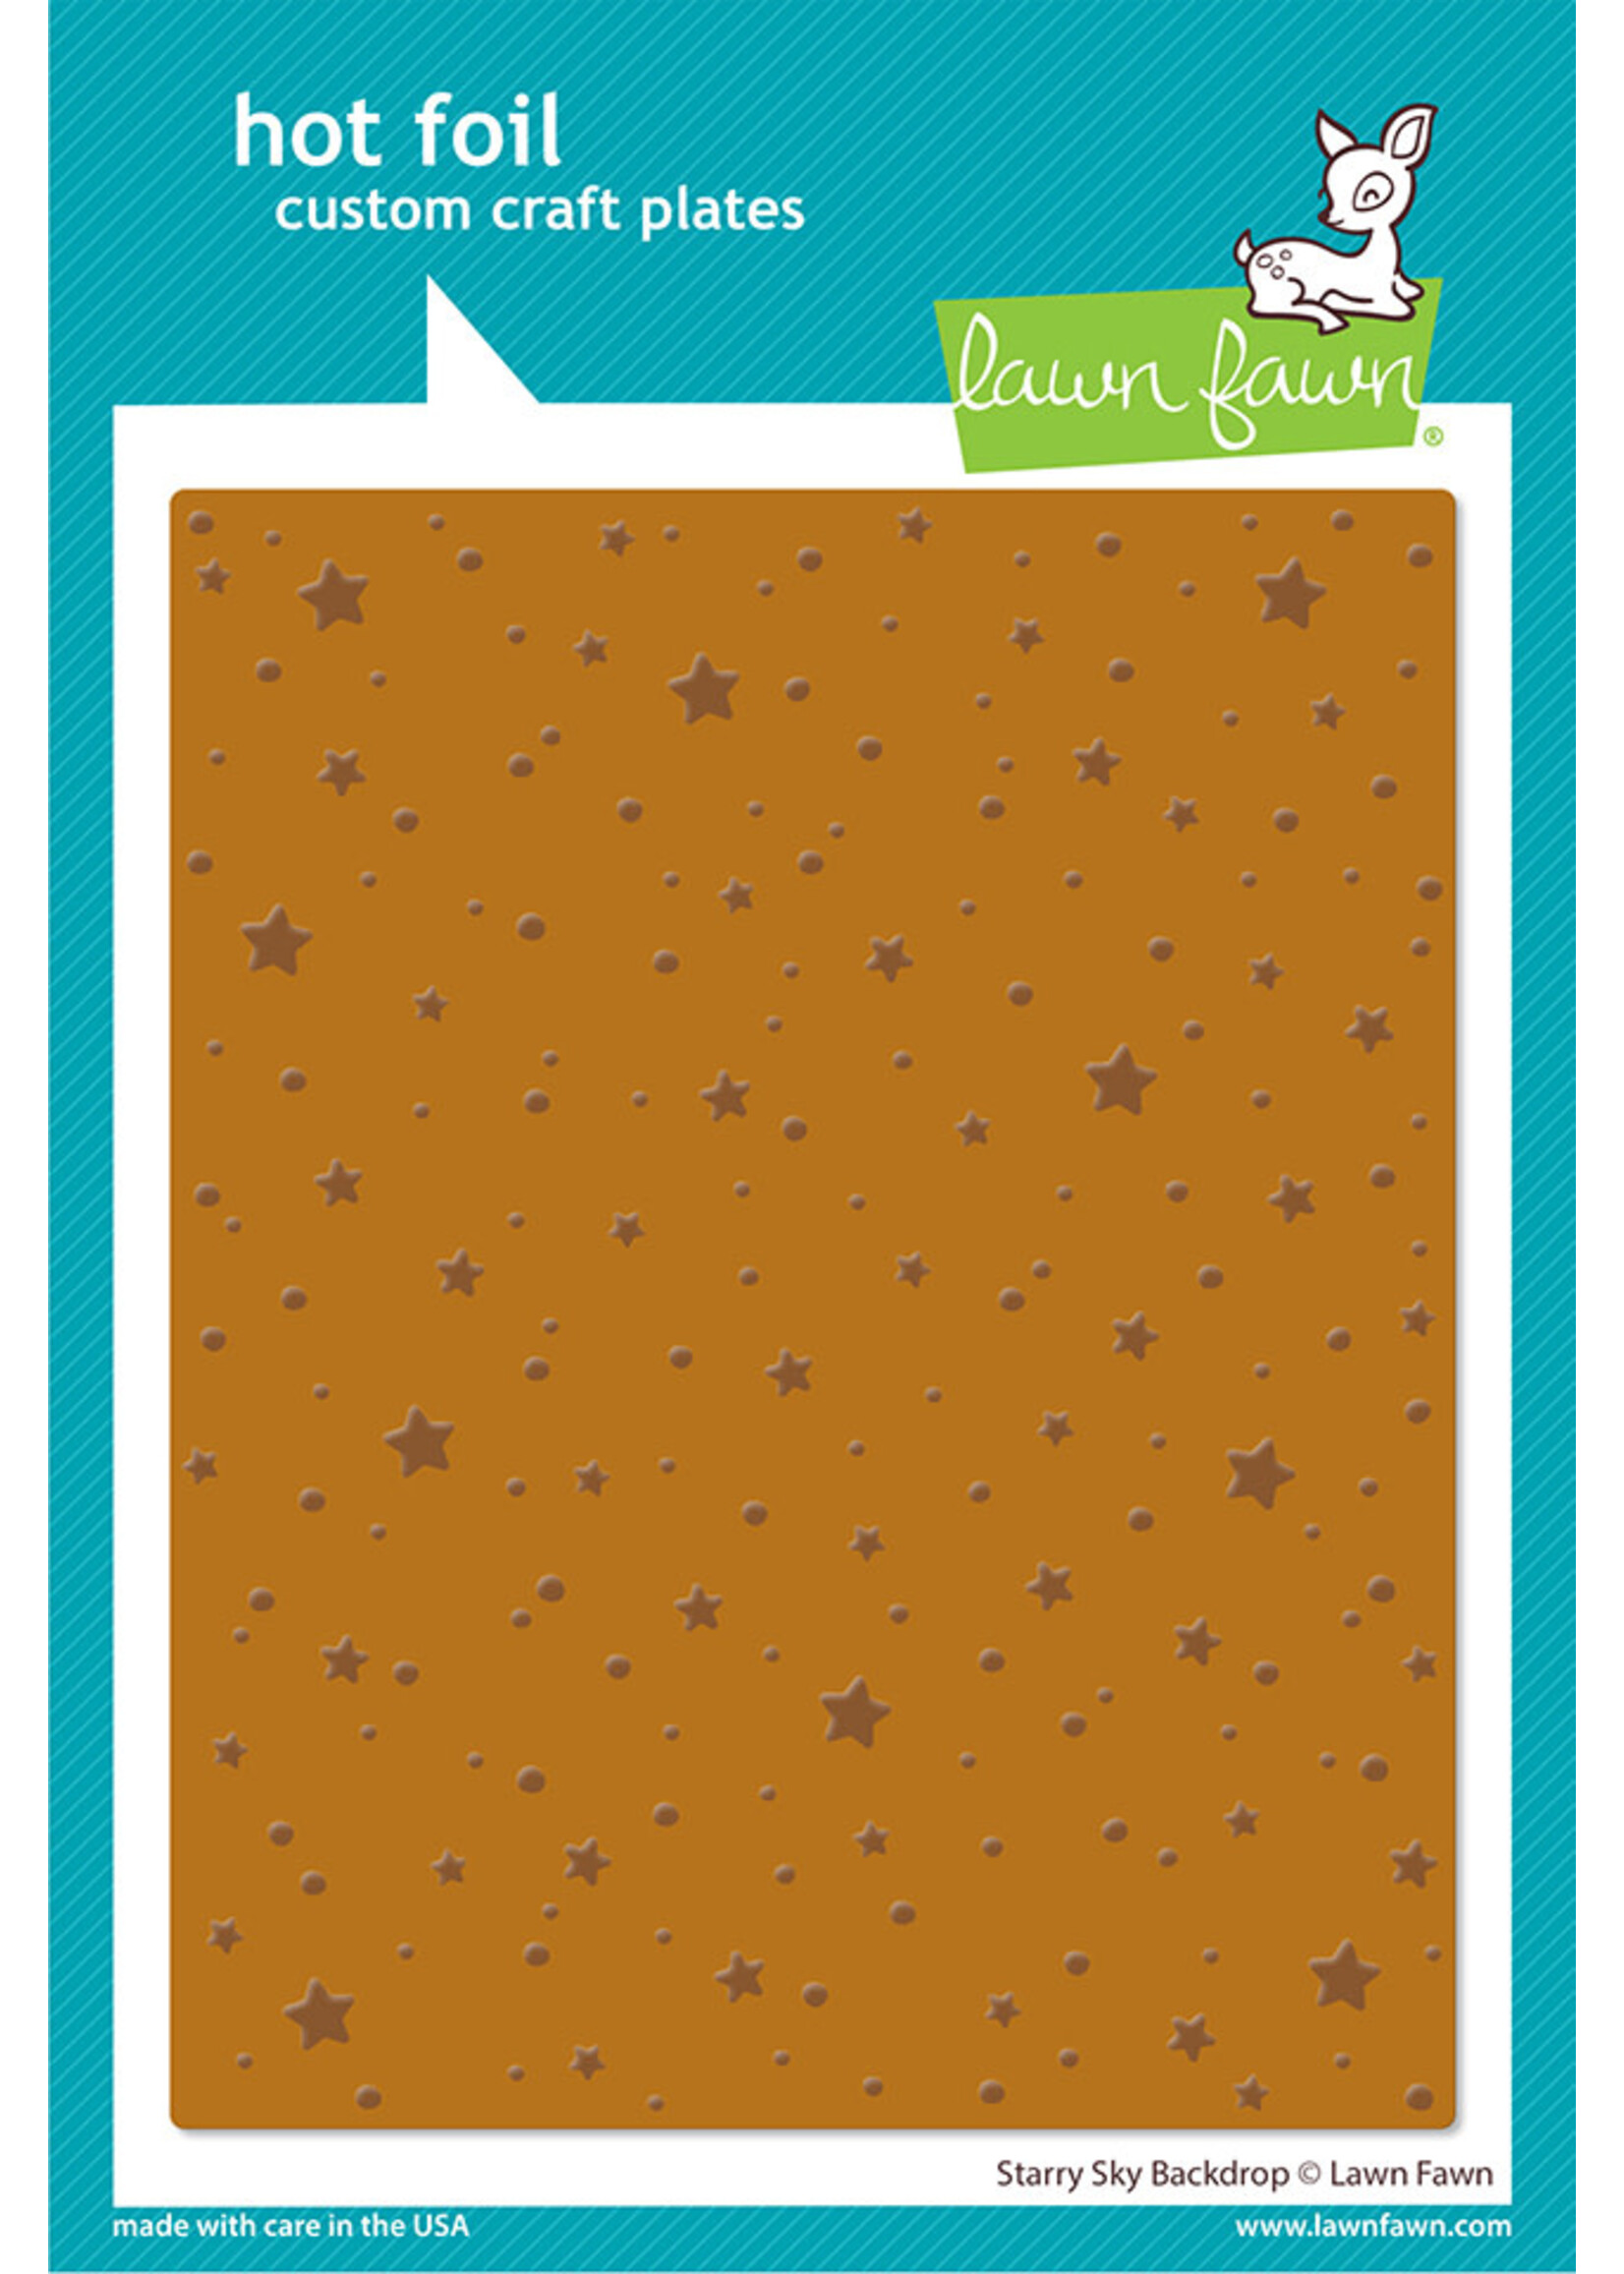 Lawn Fawn starry sky background hot foil plate